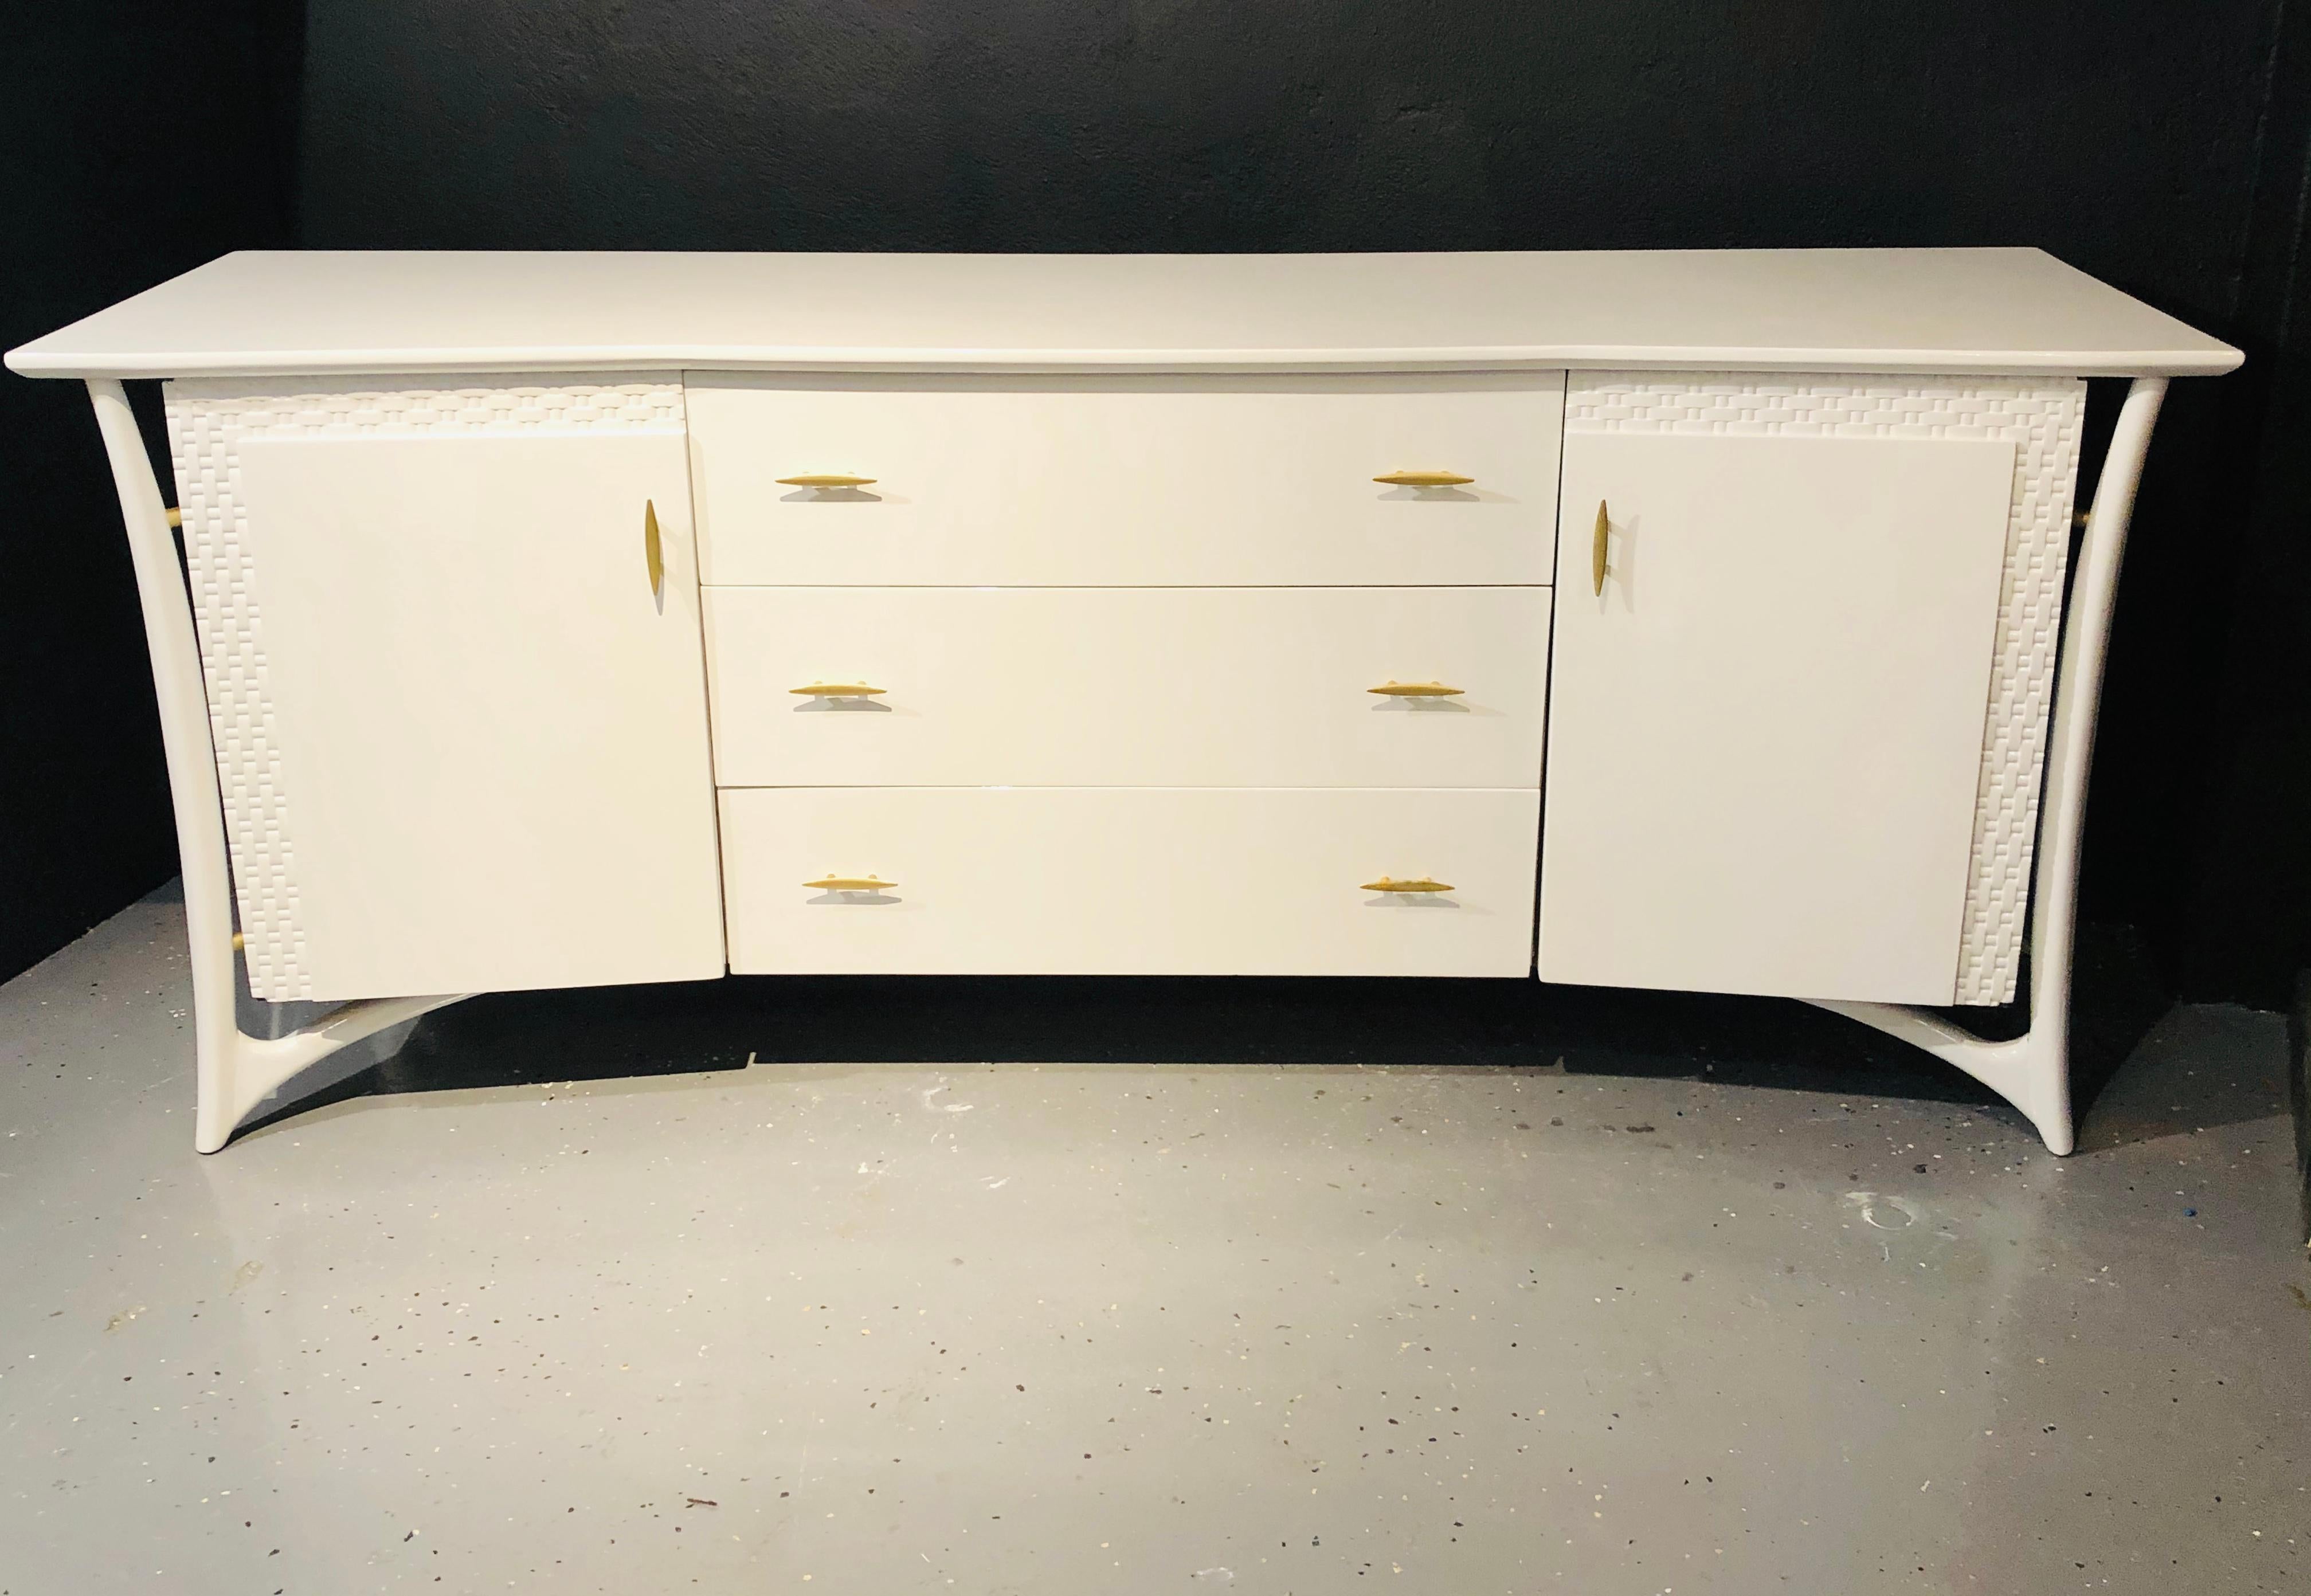 Piet Hein Attributed. Mid-Century Modern pale gray lacquered dresser, chest or sideboard. Part of a set comes this sleek and stylish fully refinished and ready to sit in your home dresser or sideboard. The outer casing having been fully re-lacquered